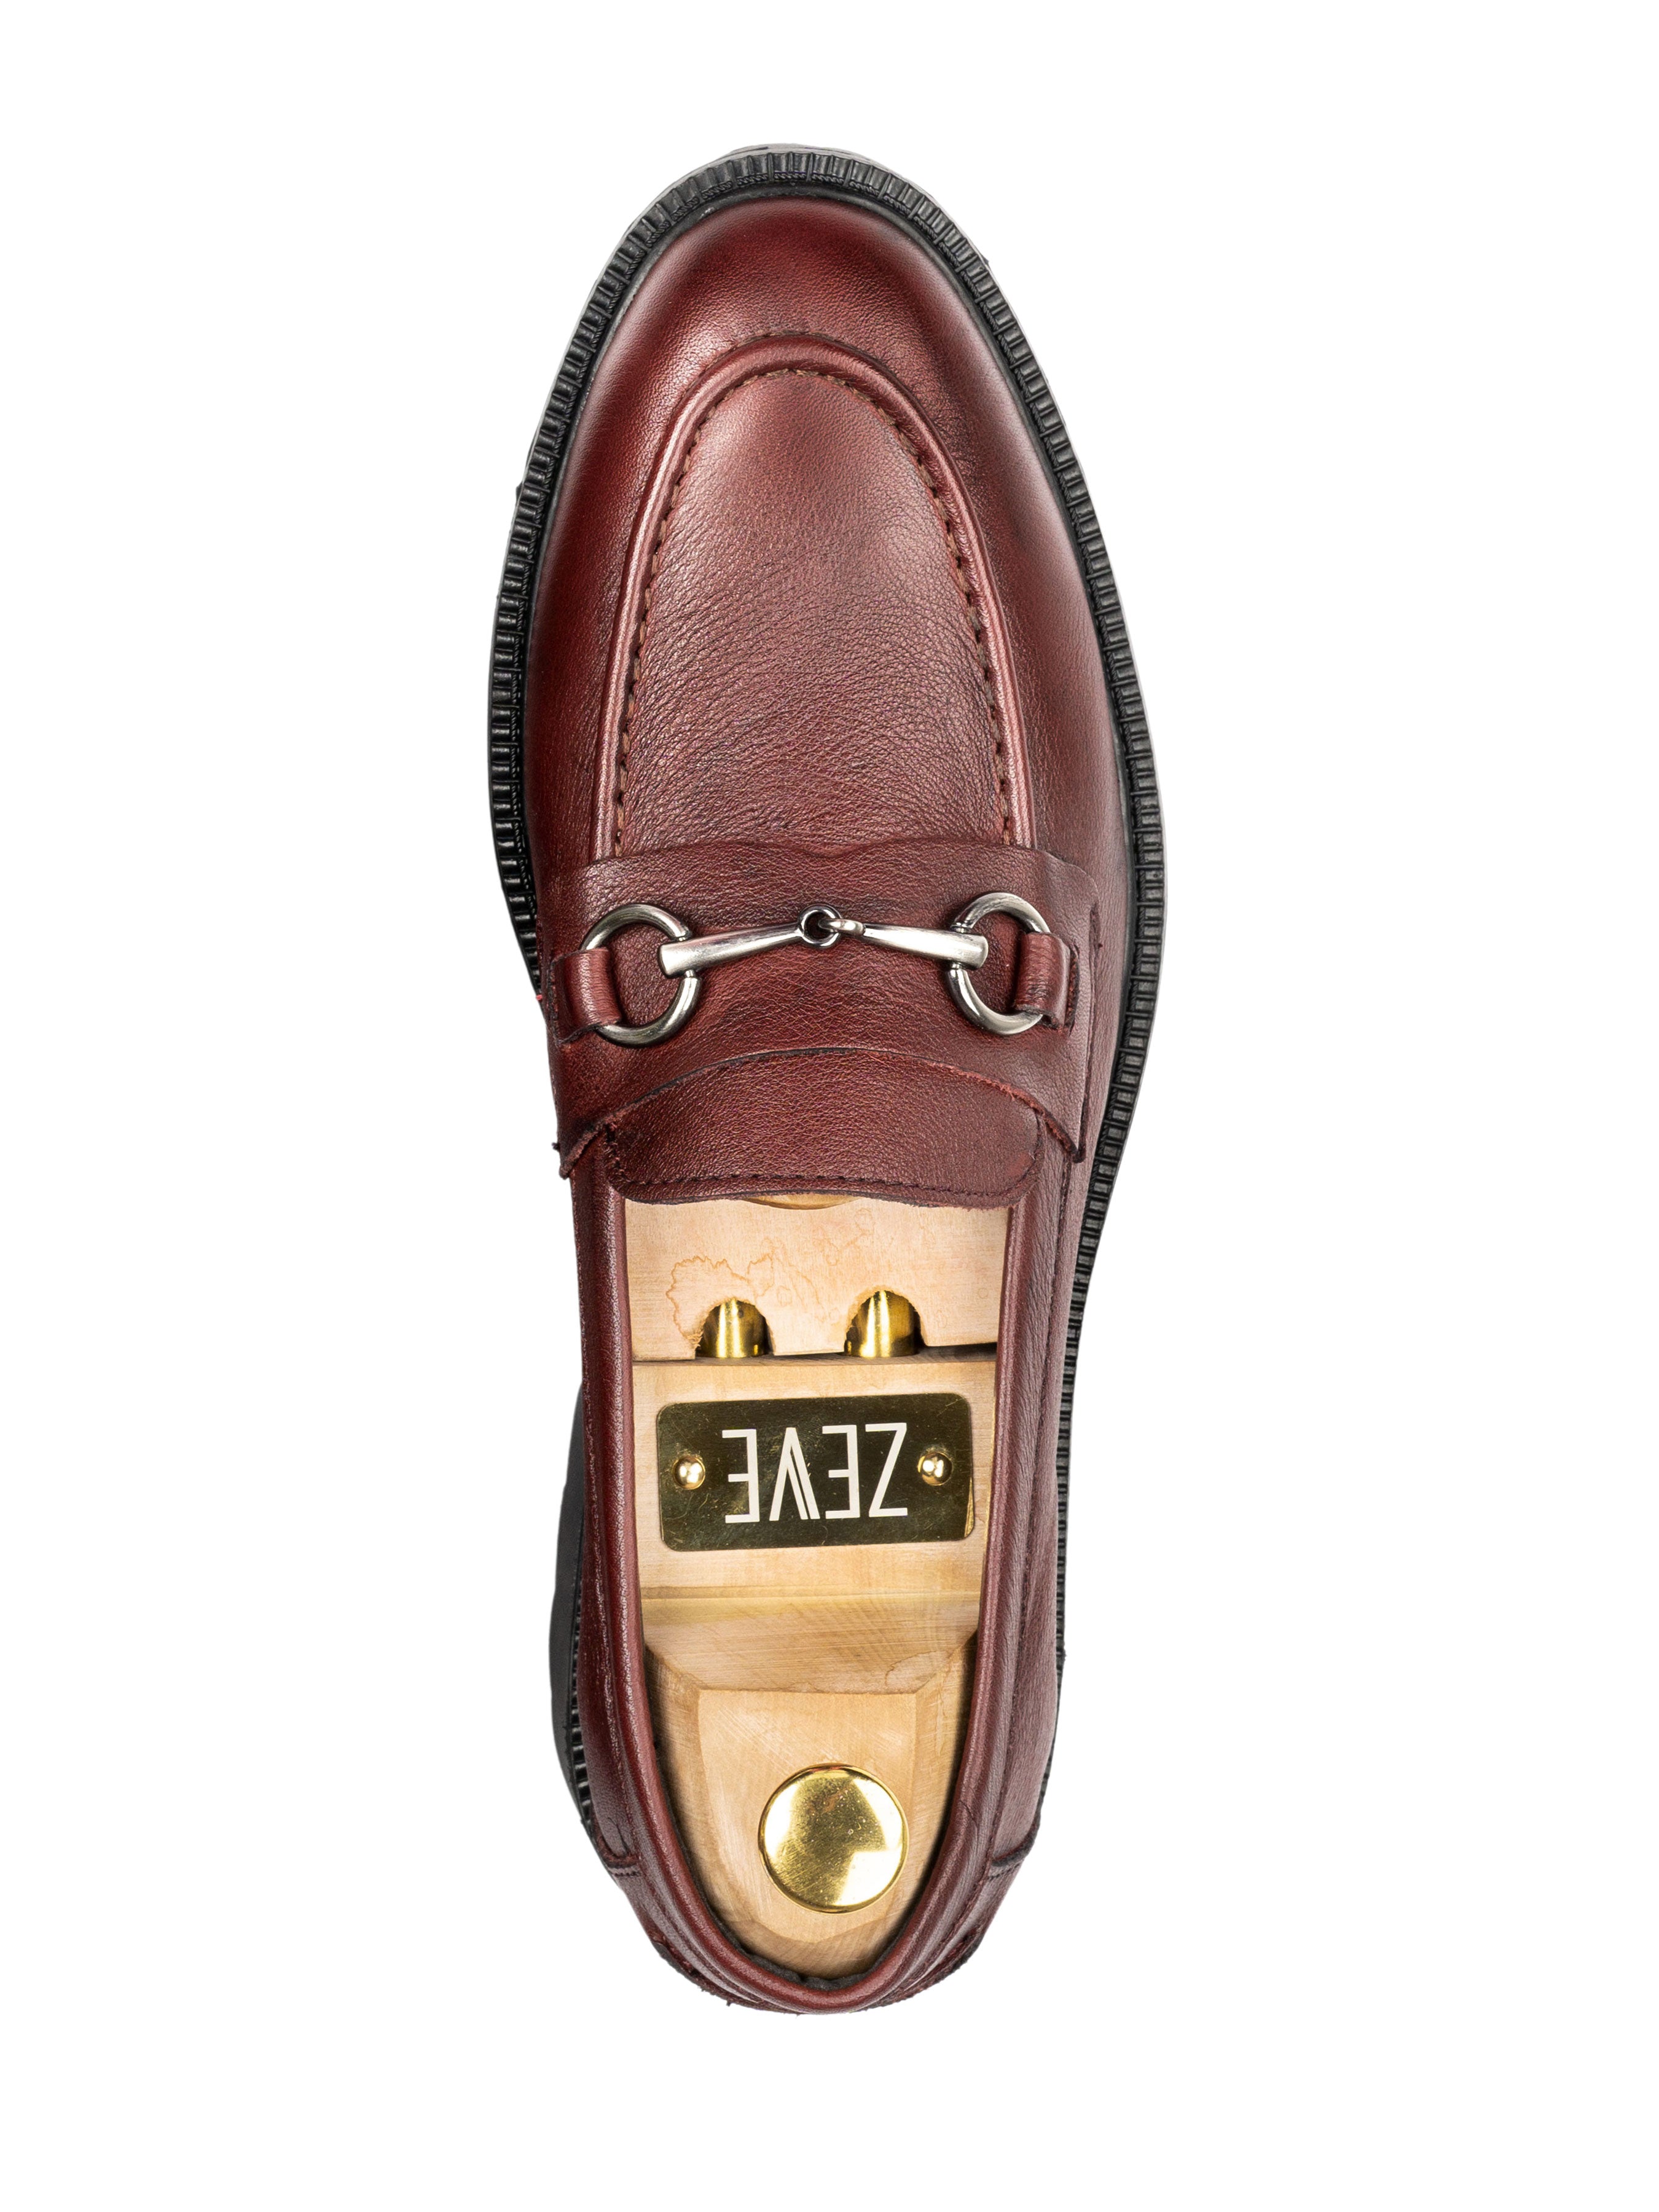 Penny Loafer Horsebit Buckle - Red Burgundy Pebble Grain Leather (Combat Sole) - Zeve Shoes